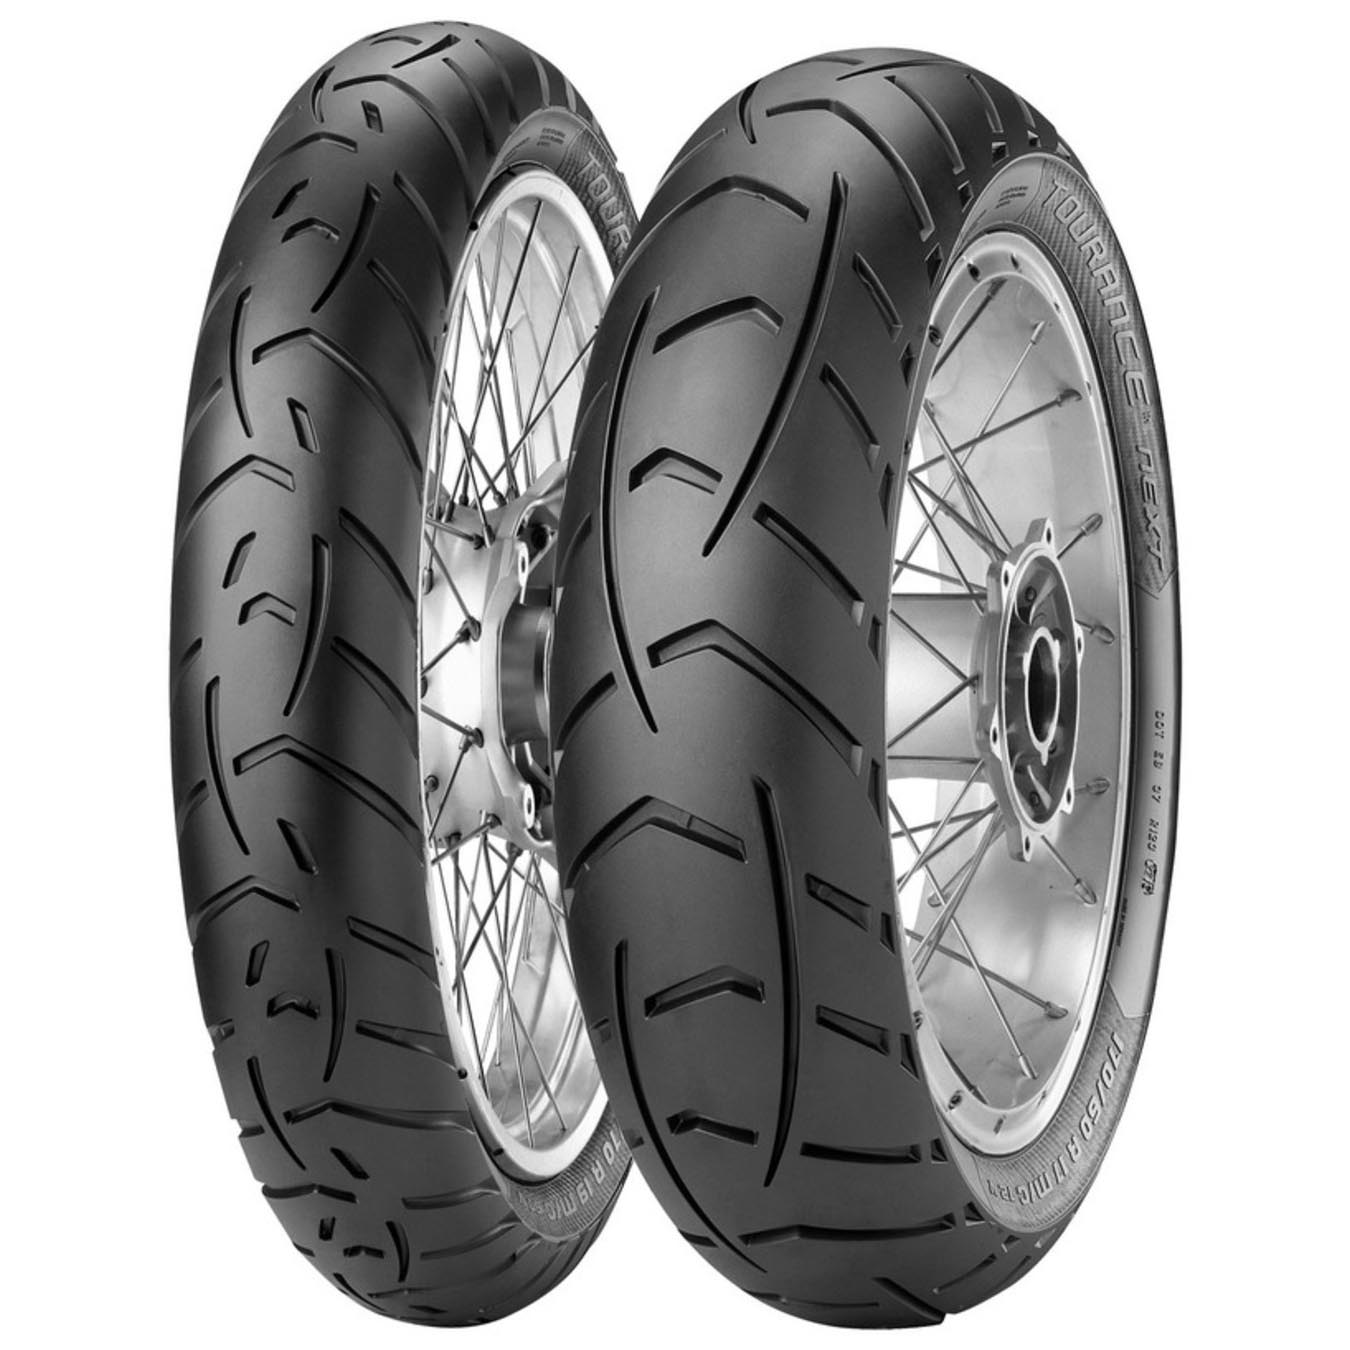 Metzeler Tourance Motorcycle Tyre 130/80 R17 M/c TL 65h for sale online 